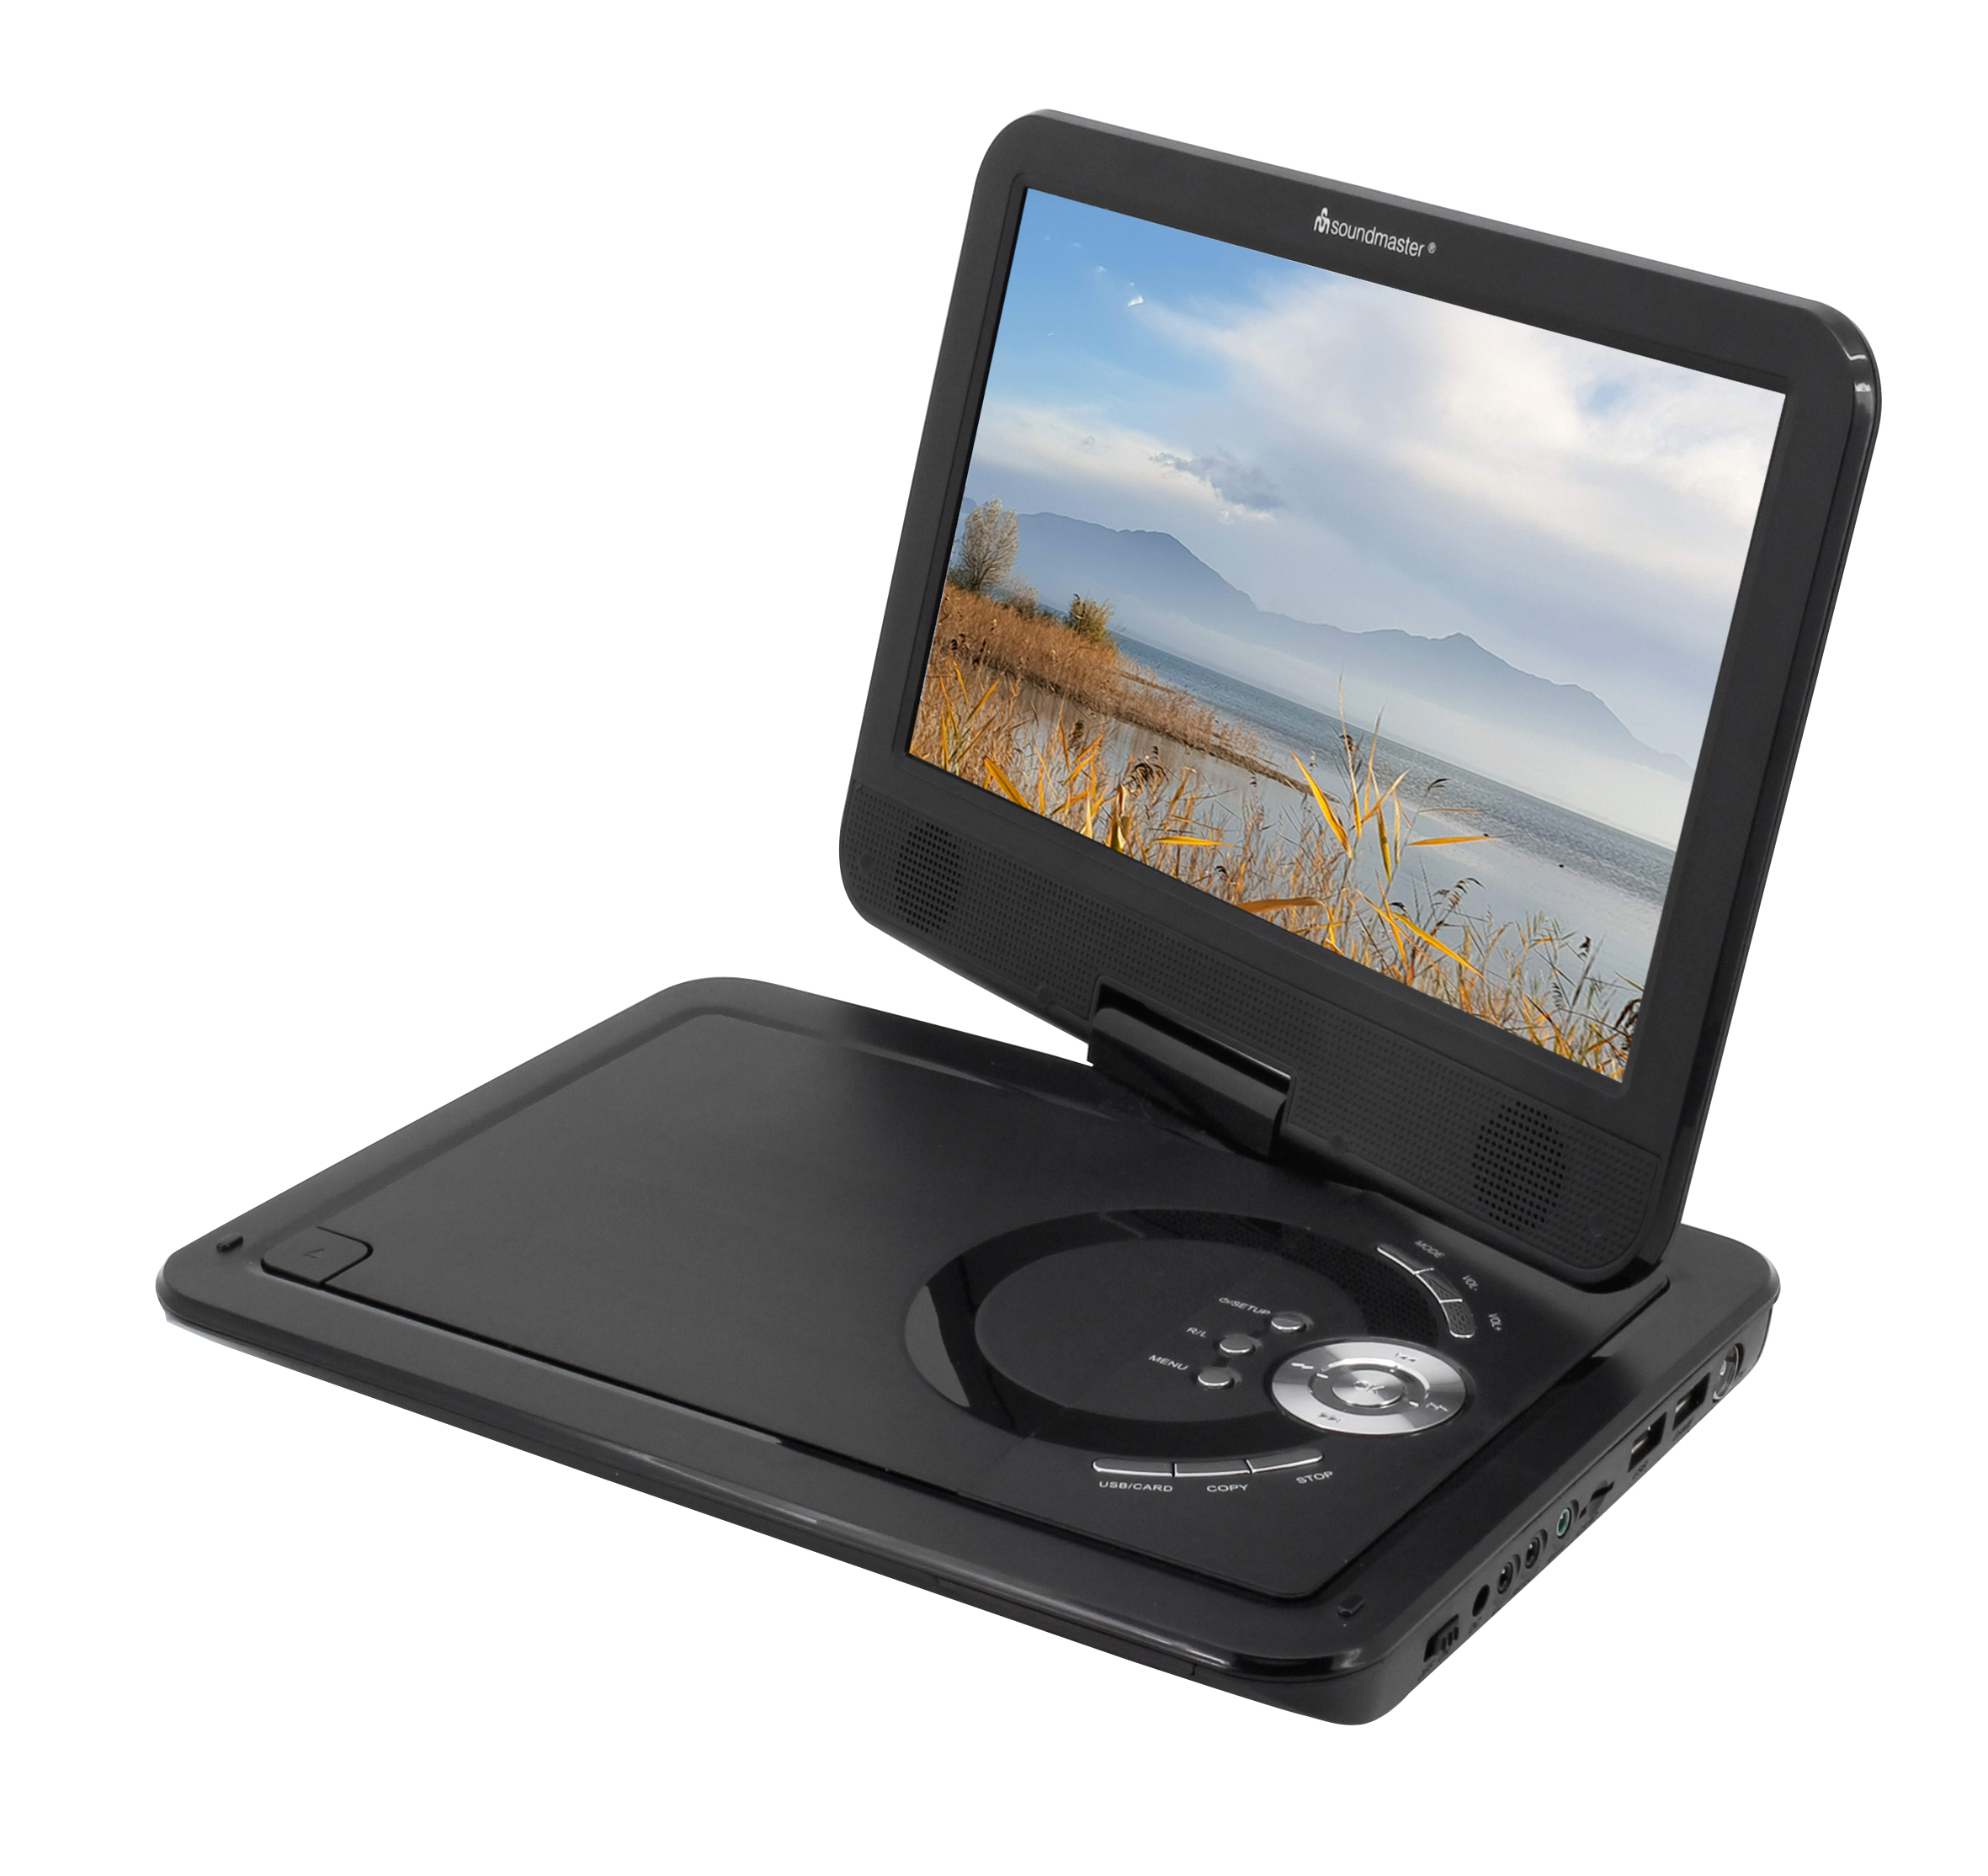 Portable DVD-Player with DVB-T2 HD-Tuner and 10.1